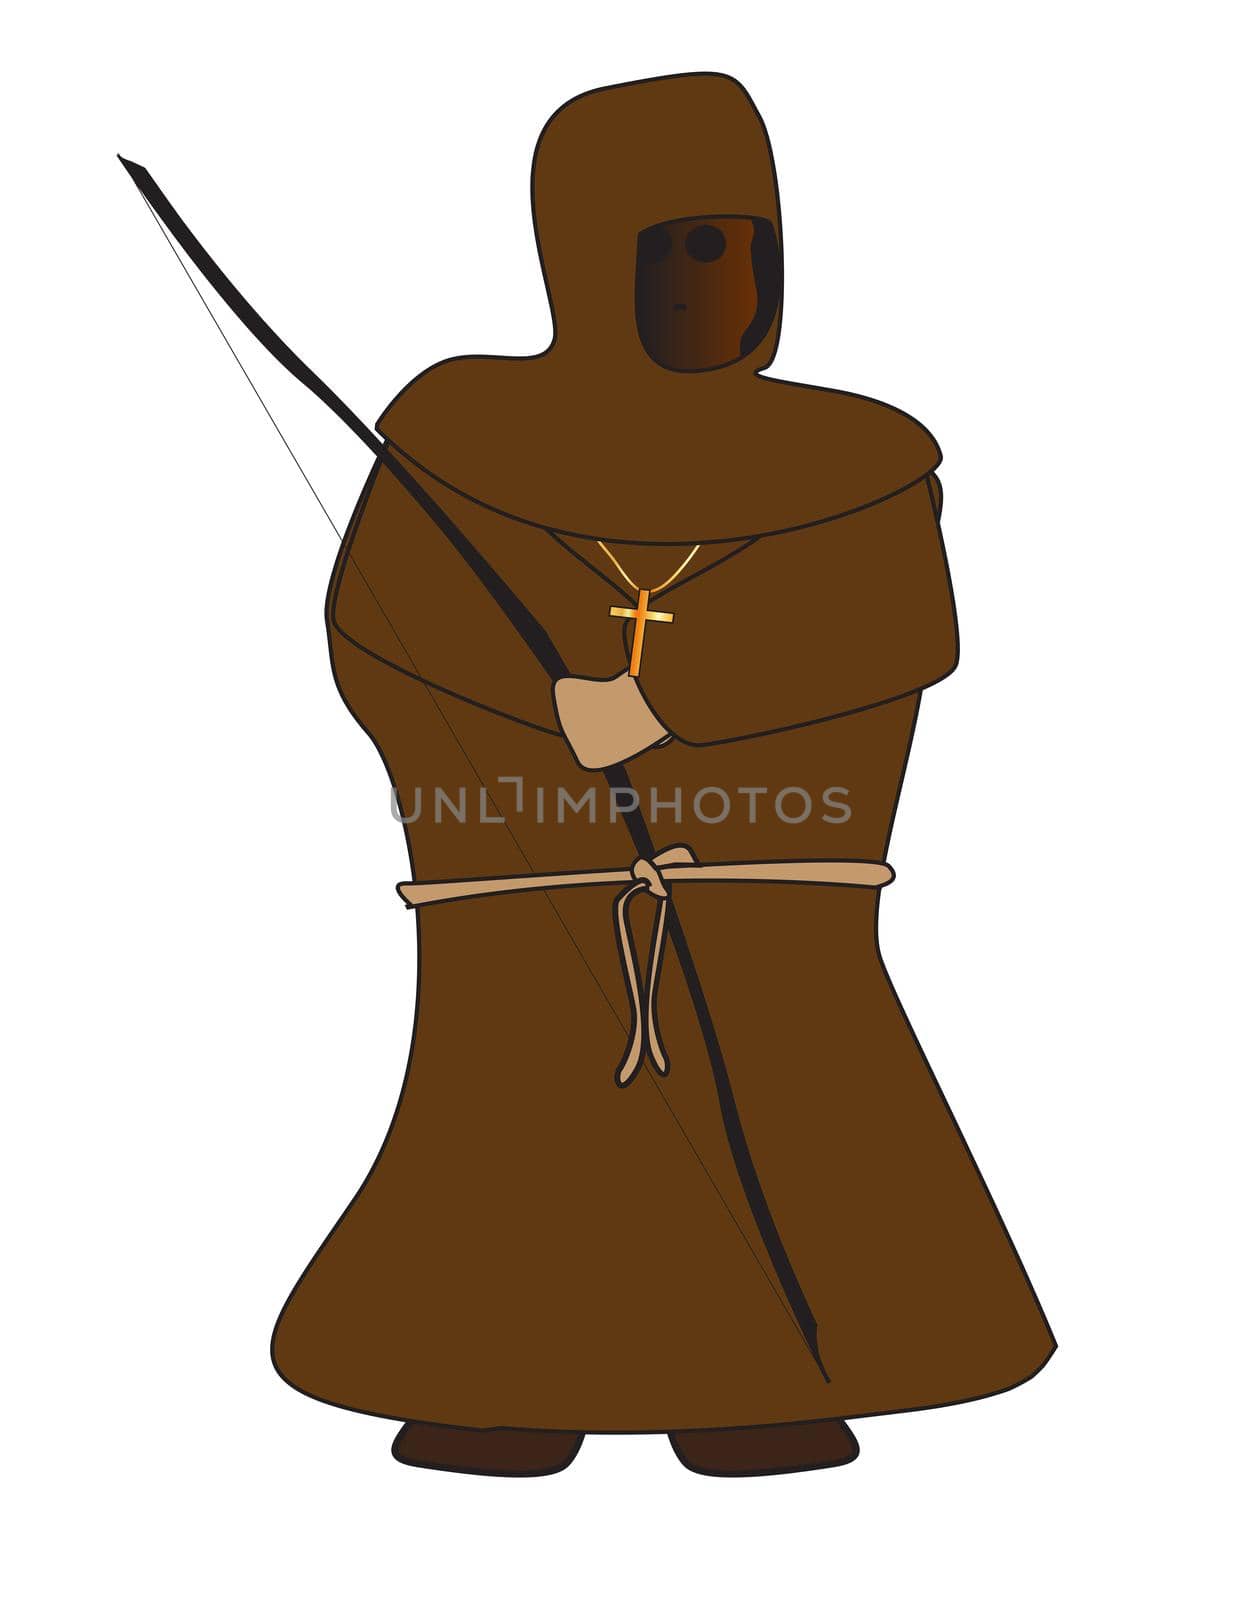 Frier Tuck the friend of the outlaw Robin Hood isolated on a white background